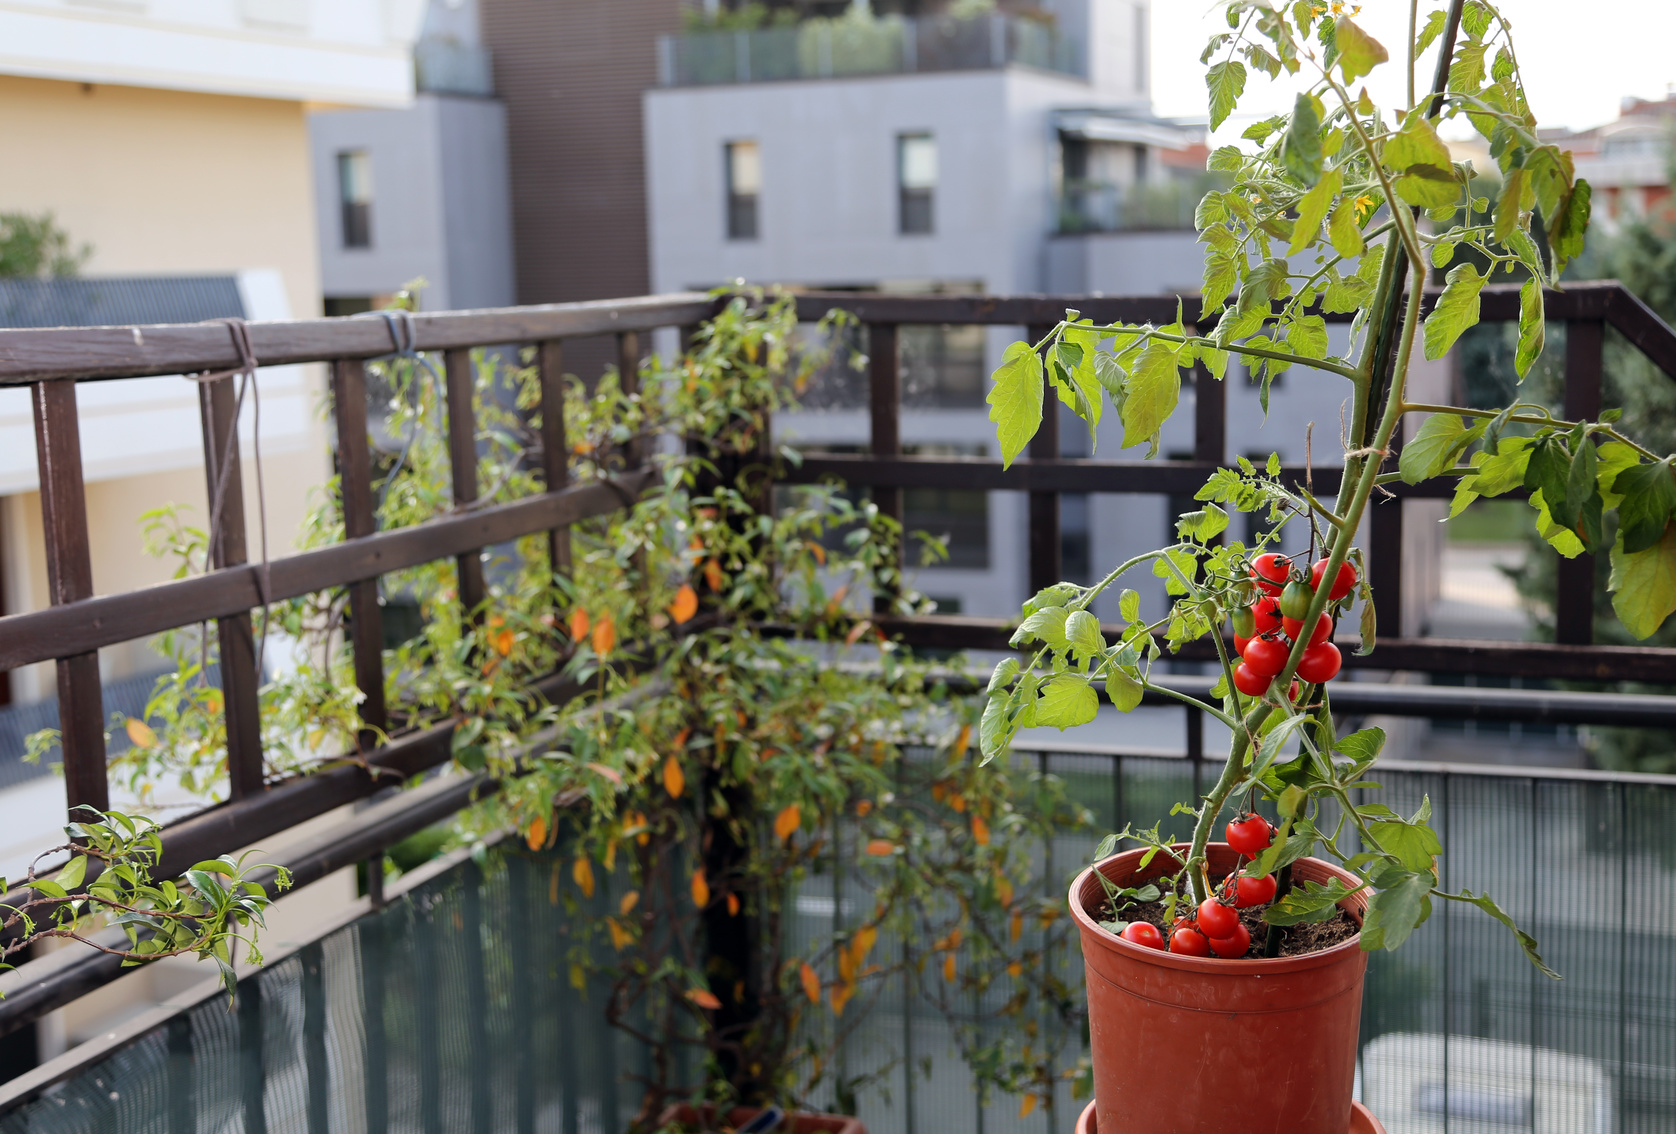 Tomato plant in the pot on the terrace of a house in the city